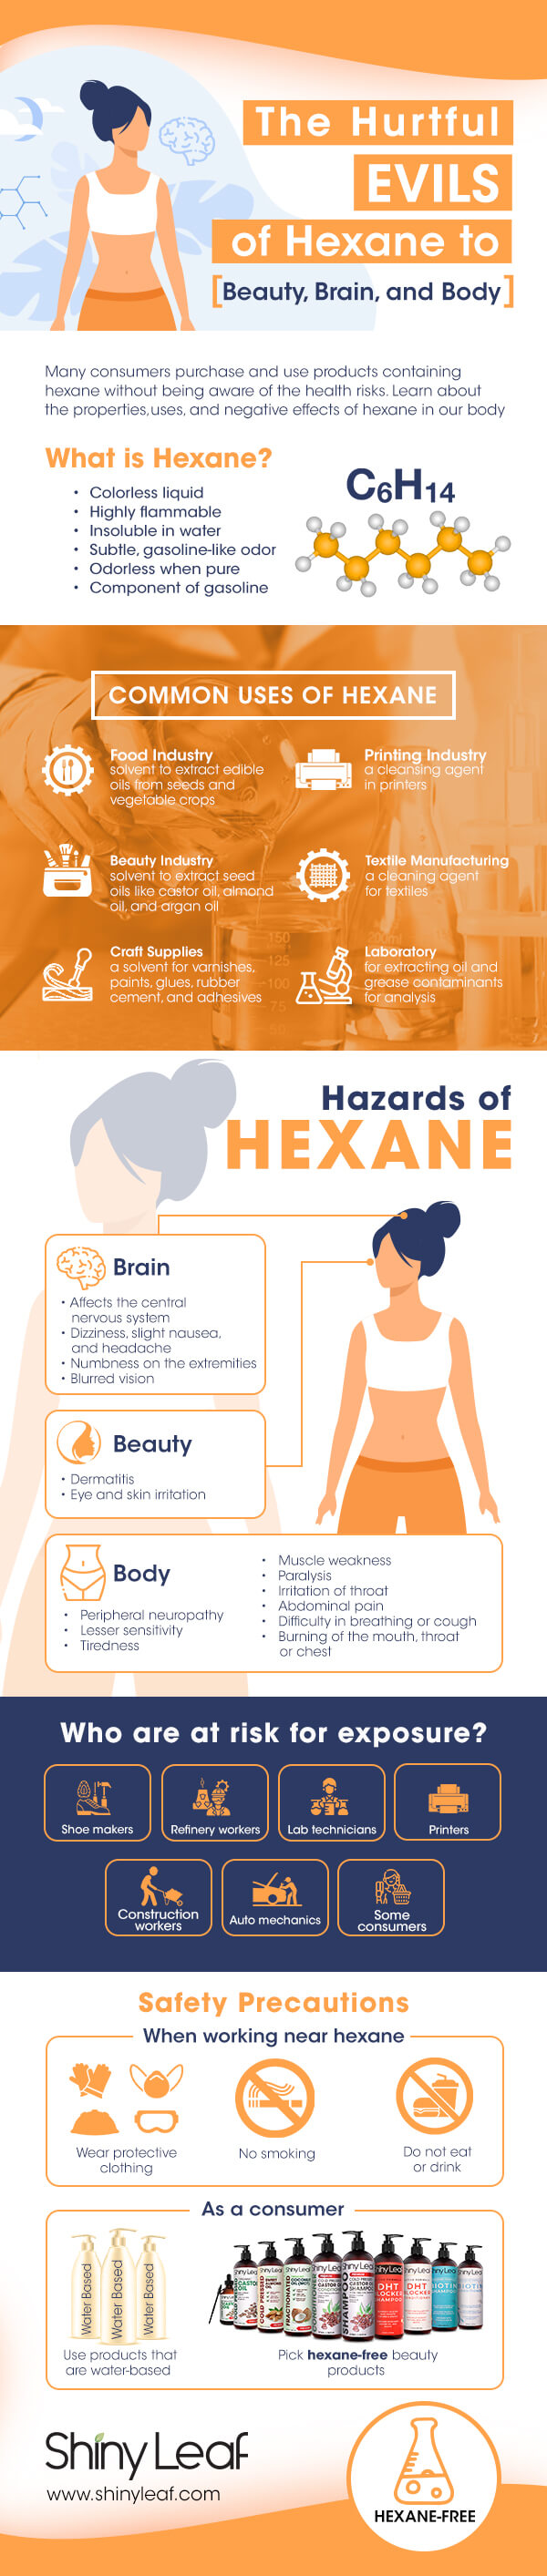 Infographic About the Negative Effects of Hexane